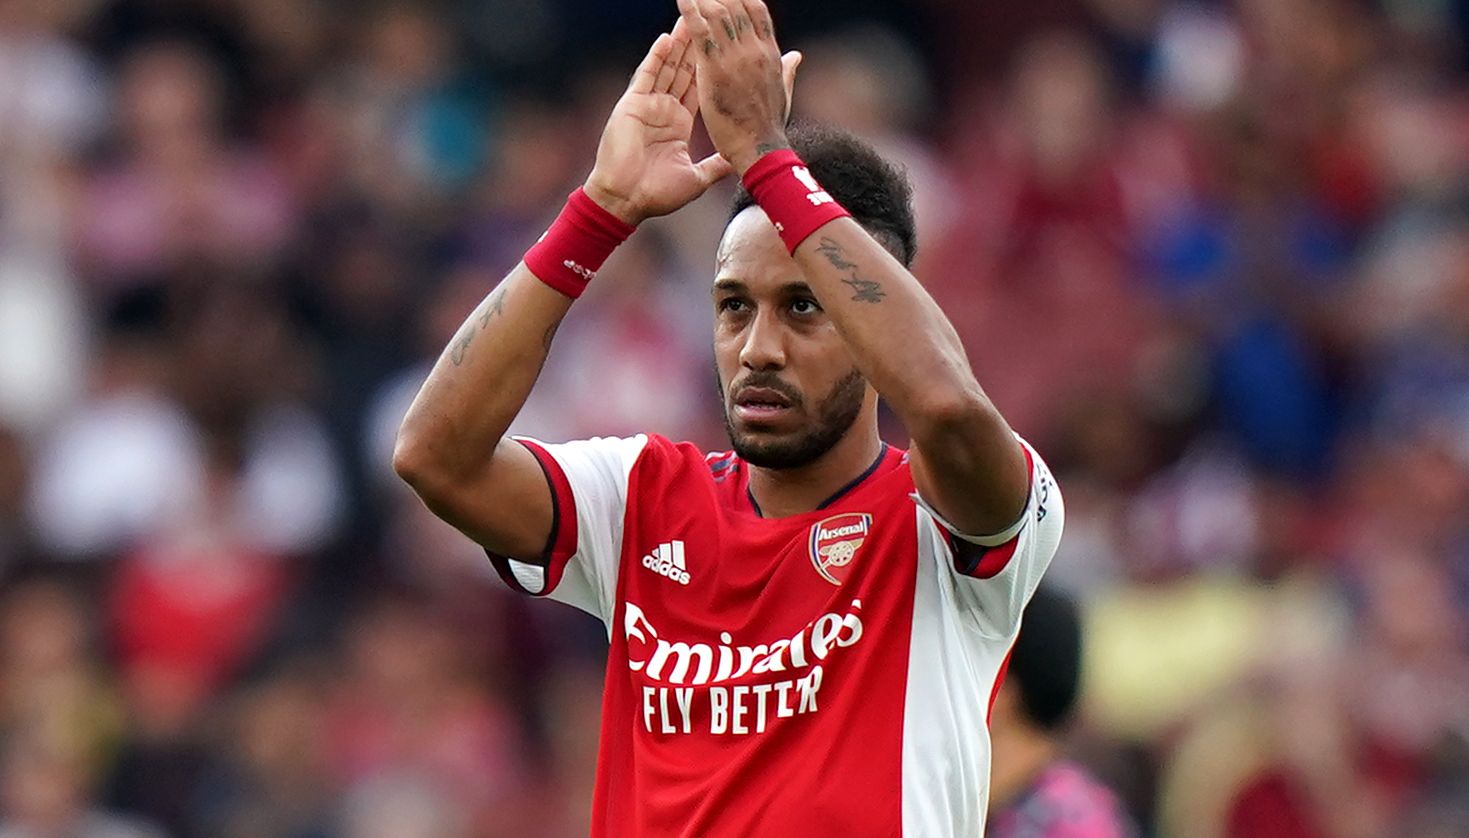 Arsenal's Pierre-Emerick Aubameyang applauds the fans after their 1-0 win over Norwich at Emirates Stadium.